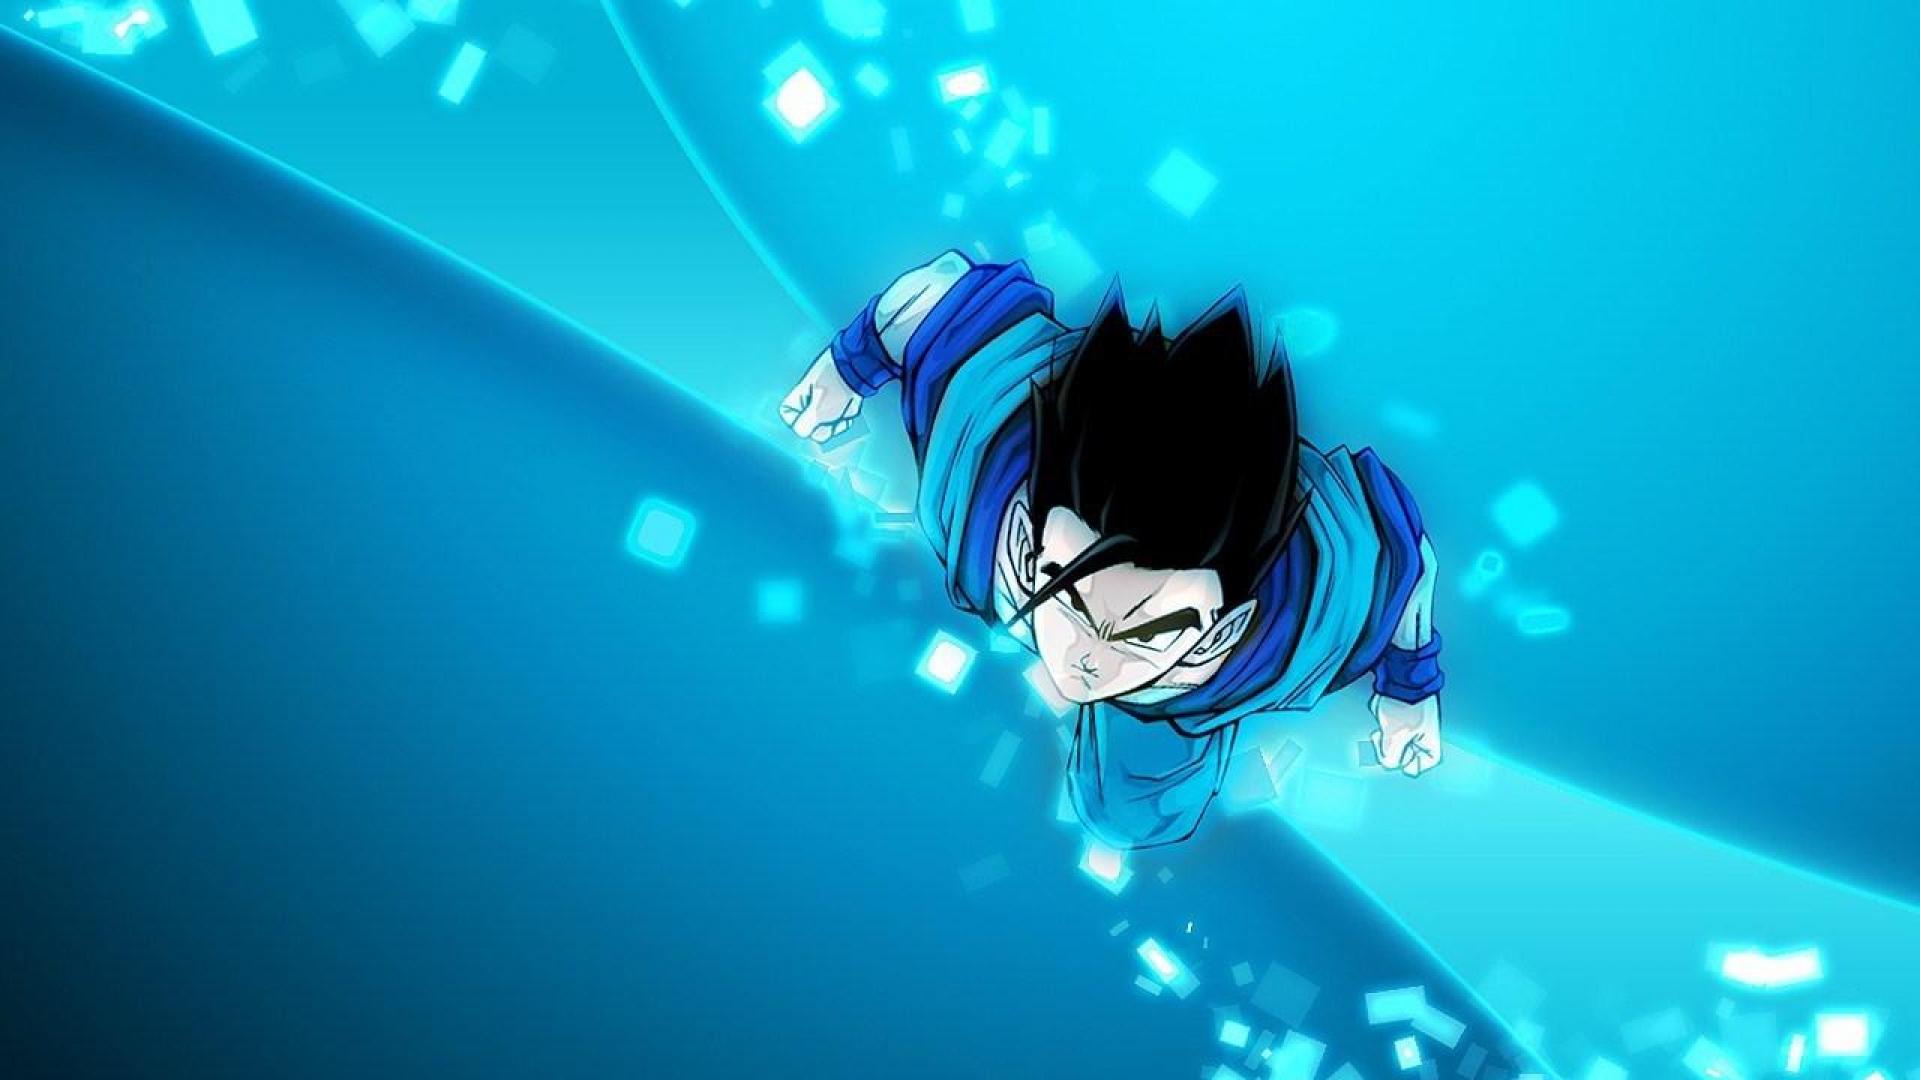 Gohan going out of the blue - (#85721) - High Quality and ...